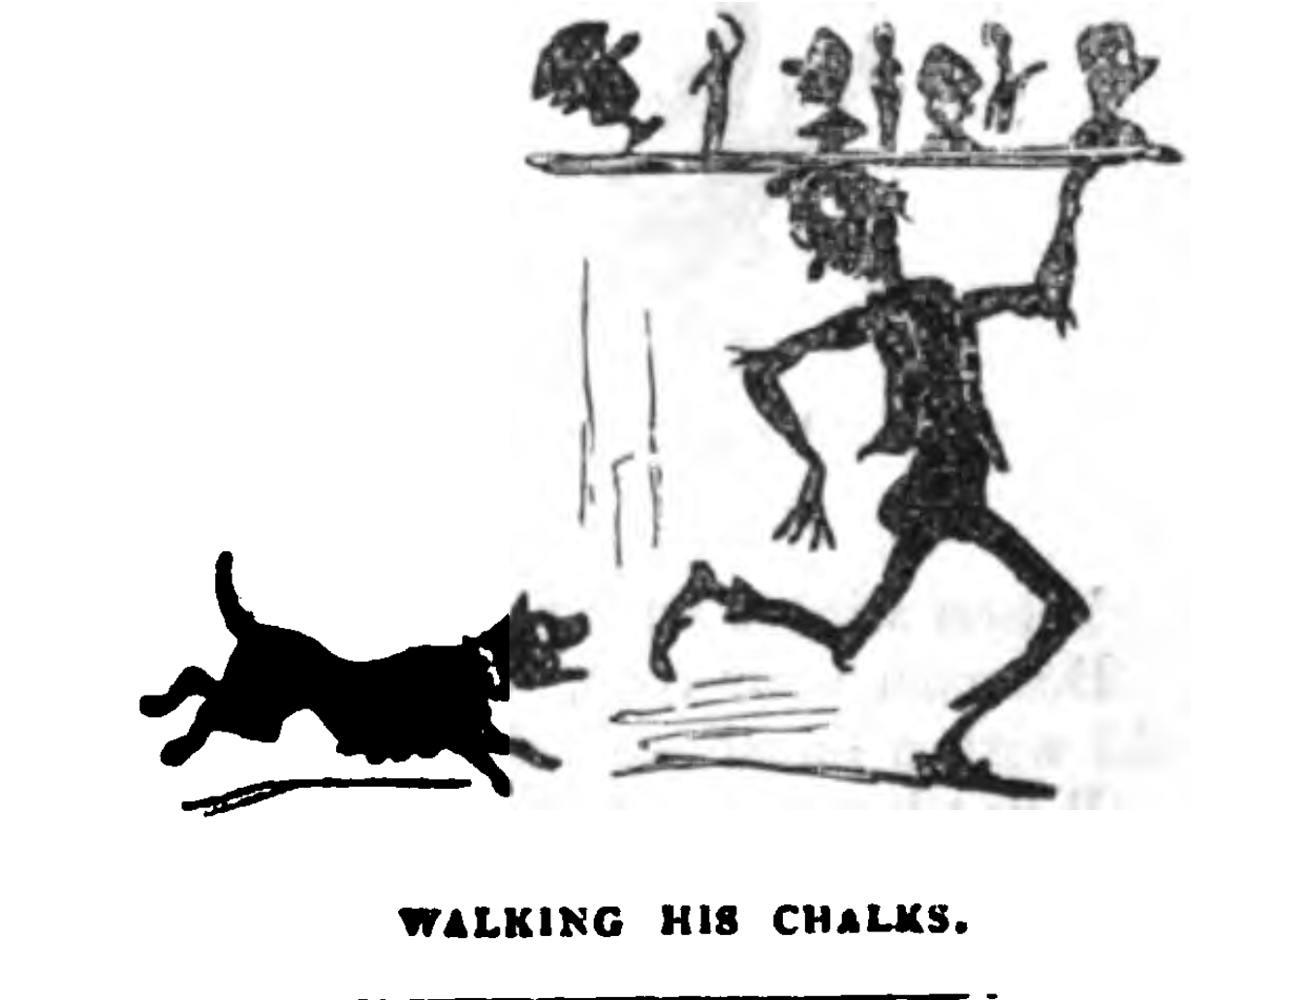 Small cartoon of hurrying image seller chased by dog